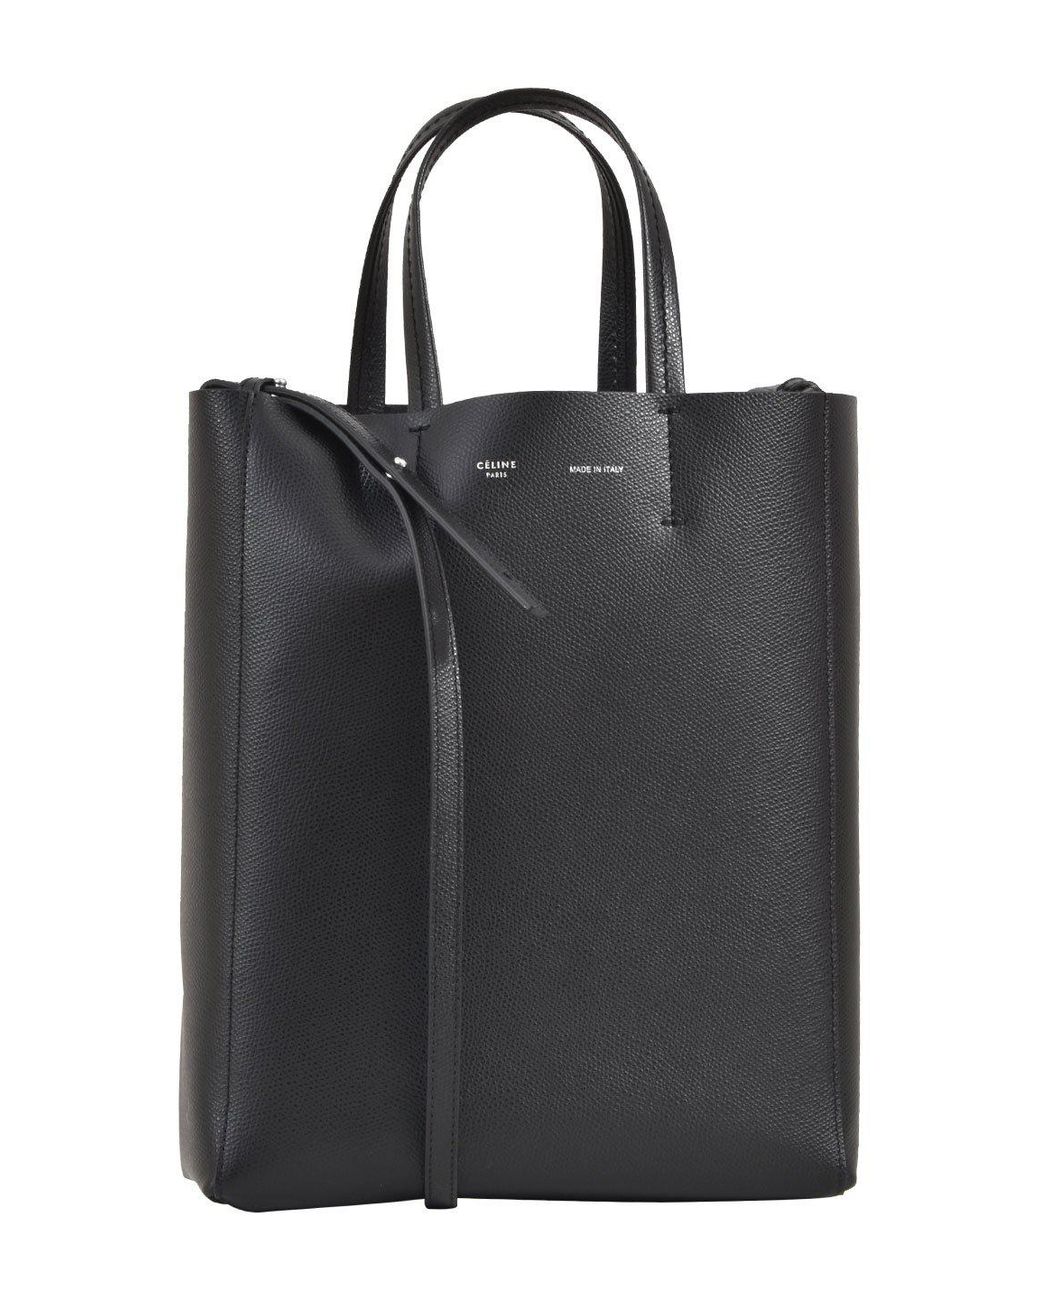 Celine Small Cabas Leather Tote Bag in Black | Lyst